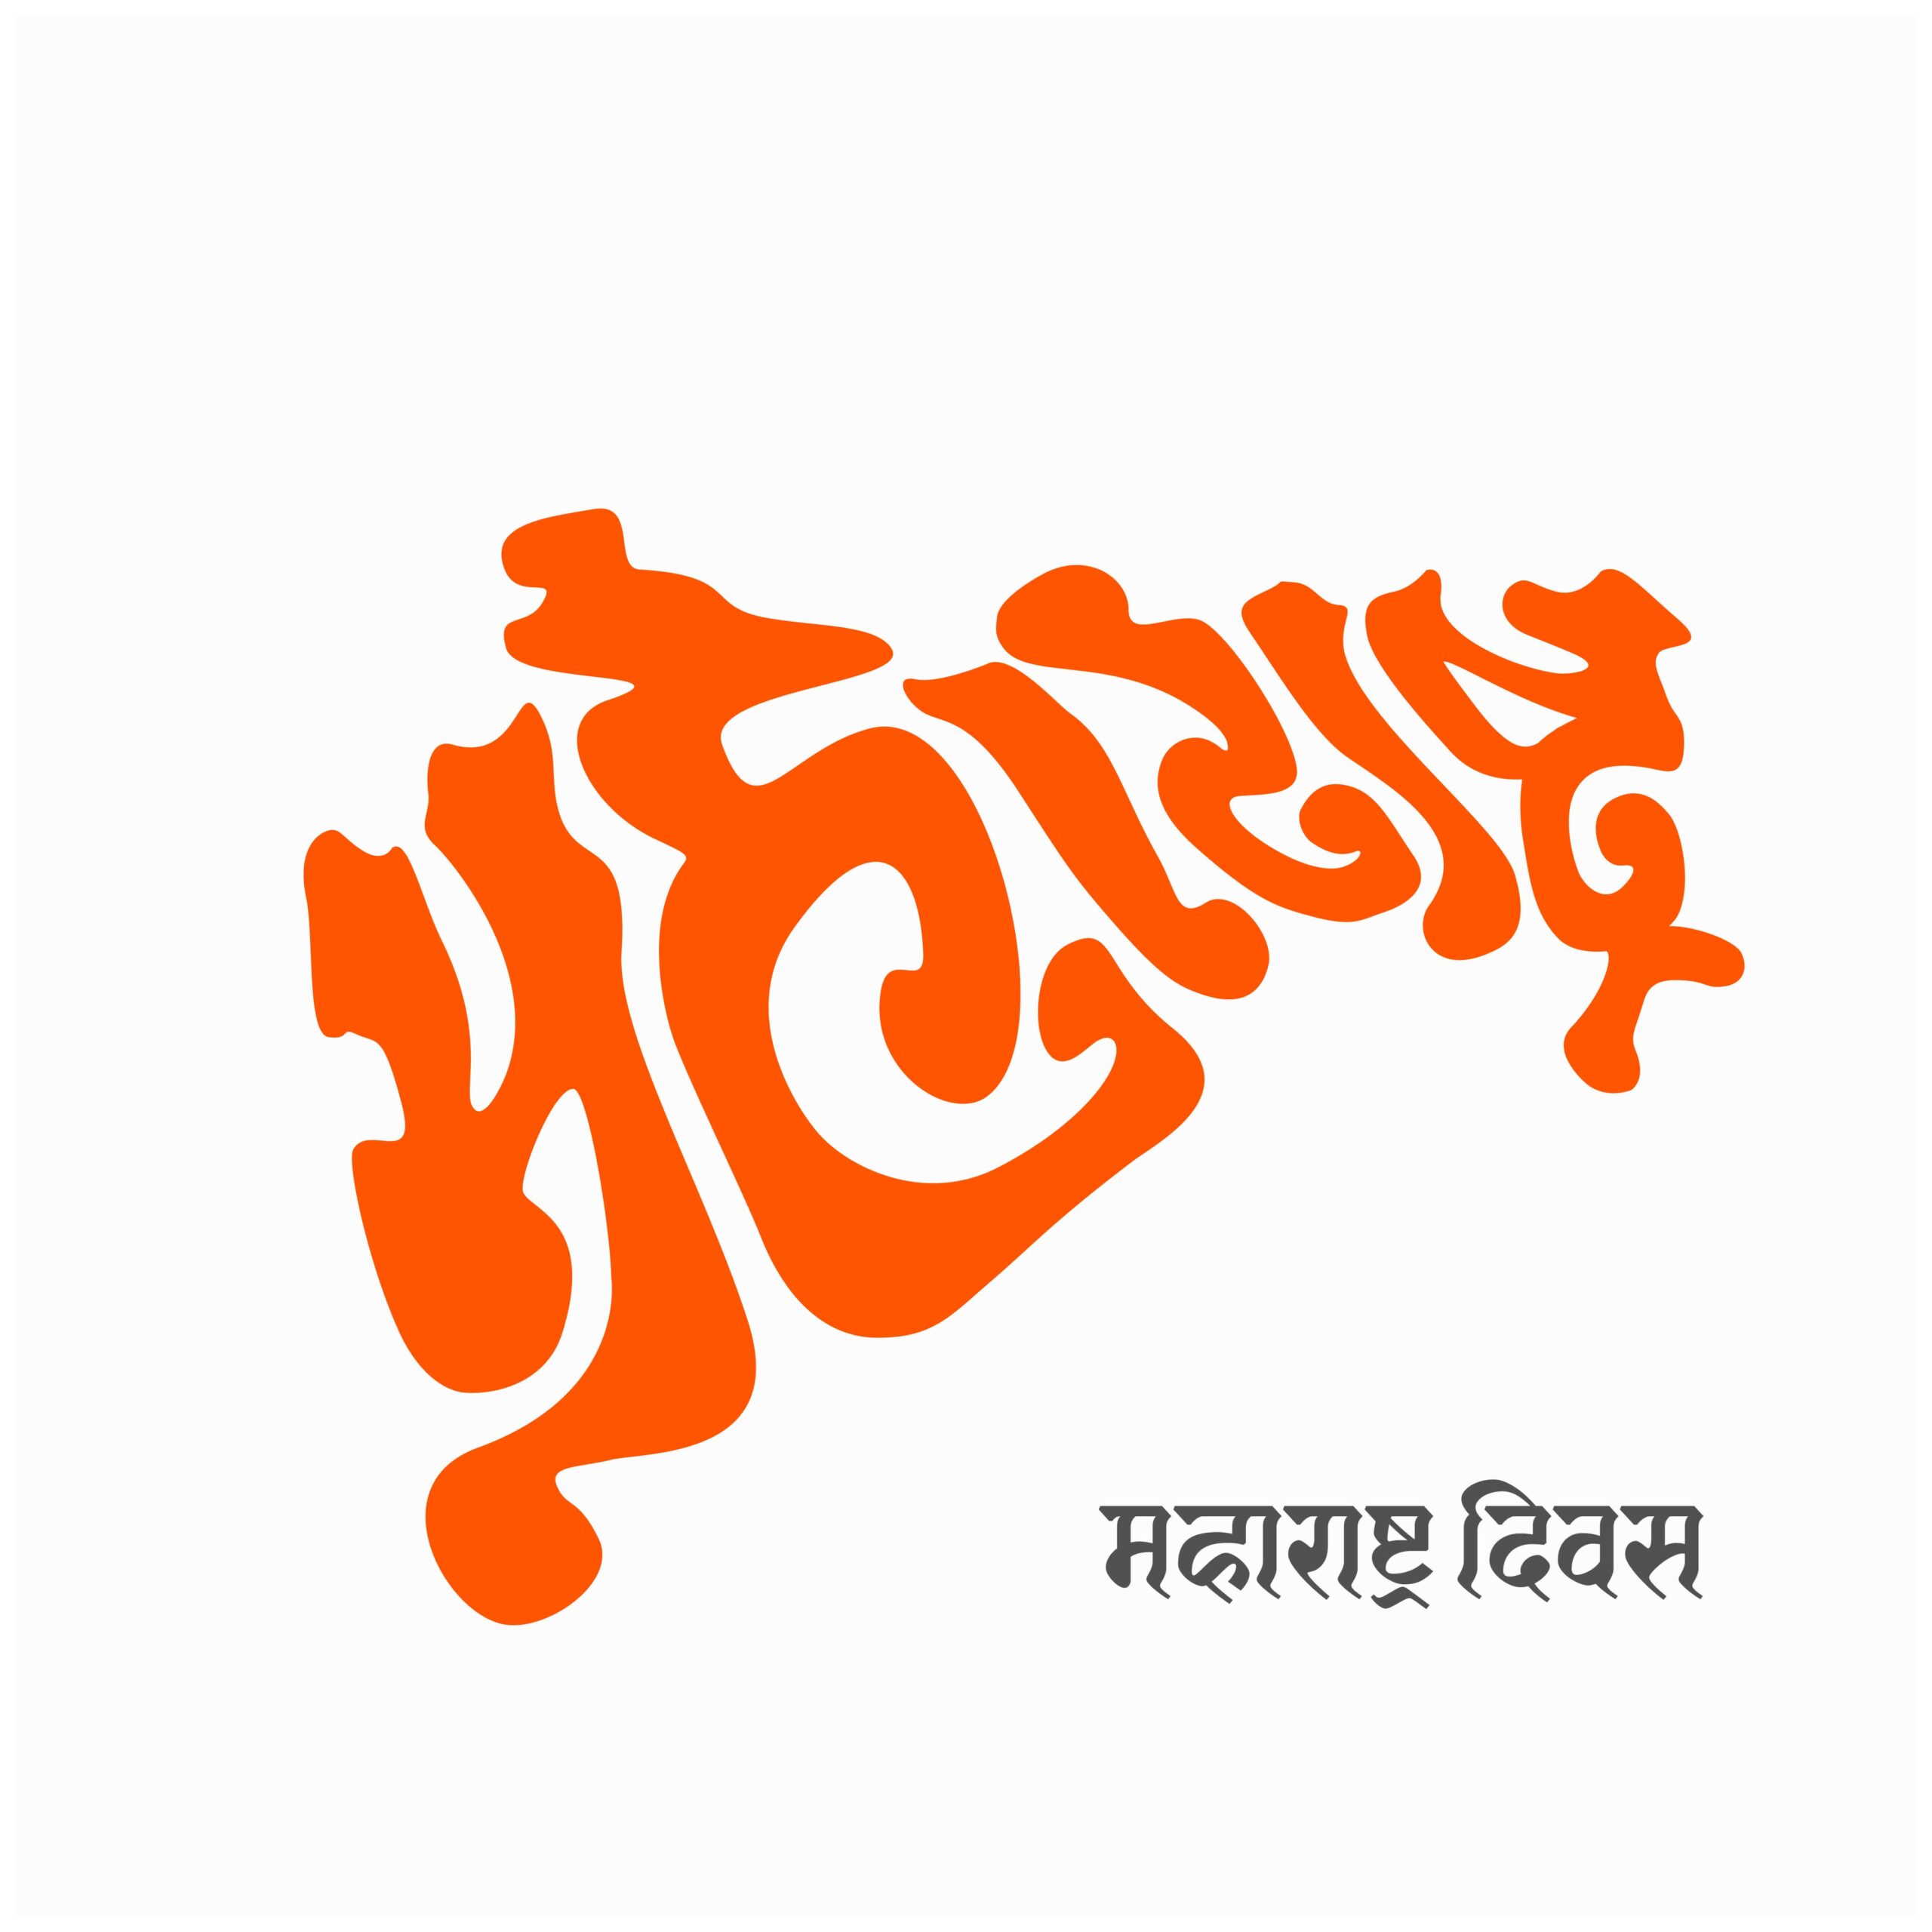 An artistic rendering of the word "महाराष्ट्र" in a stylized Devanagari script in bold orange color, with a shadow effect, placed against a plain white background. Below, in smaller standard font, is the phrase "महाराष्ट्र दिवस" which translates to "Maharashtra Day."